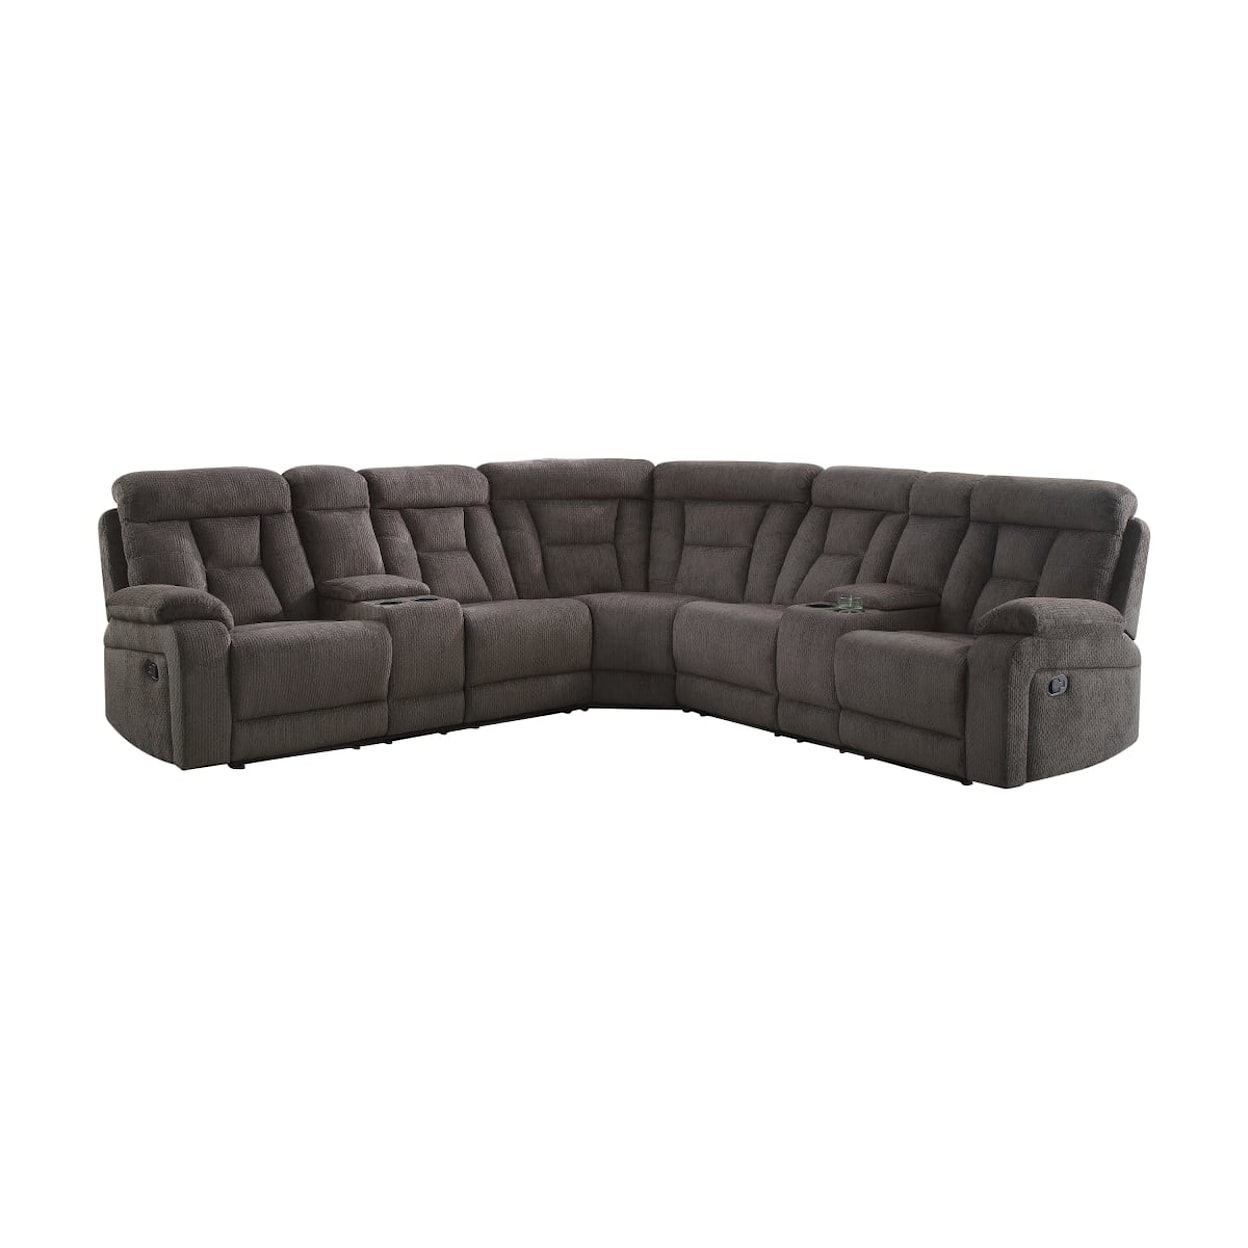 Homelegance Furniture Rosnay 3-Piece Reclining Sectional Sofa